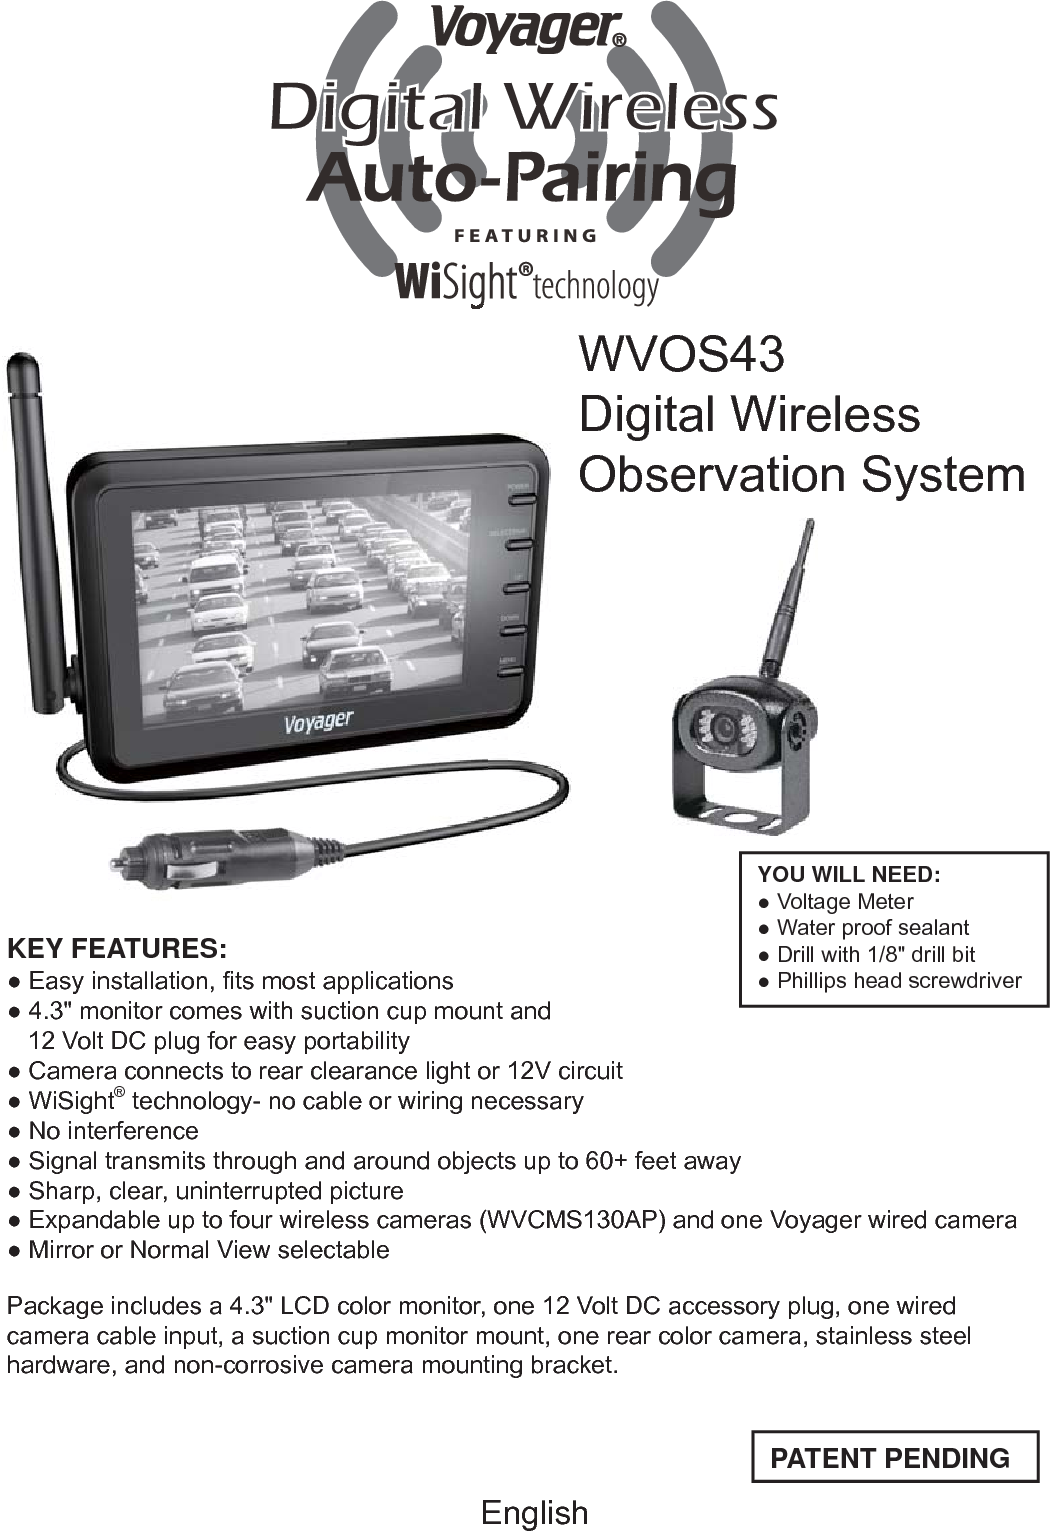 WVOS43Digital WirelessObservation SystemPATENT PENDINGYOU WILL NEED:● Voltage Meter● Water proof sealant● Drill with 1/8&quot; drill bit● Phillips head screwdriverEnglishKEY FEATURES:● Easy installation, ﬁ ts most applications● 4.3&quot; monitor comes with suction cup mount and    12 Volt DC plug for easy portability● Camera connects to rear clearance light or 12V circuit● WiSight® technology- no cable or wiring necessary● No interference● Signal transmits through and around objects up to 60+ feet away● Sharp, clear, uninterrupted picture● Expandable up to four wireless cameras (WVCMS130AP) and one Voyager wired camera● Mirror or Normal View selectable Package includes a 4.3&quot; LCD color monitor, one 12 Volt DC accessory plug, one wired camera cable input, a suction cup monitor mount, one rear color camera, stainless steel hardware, and non-corrosive camera mounting bracket.